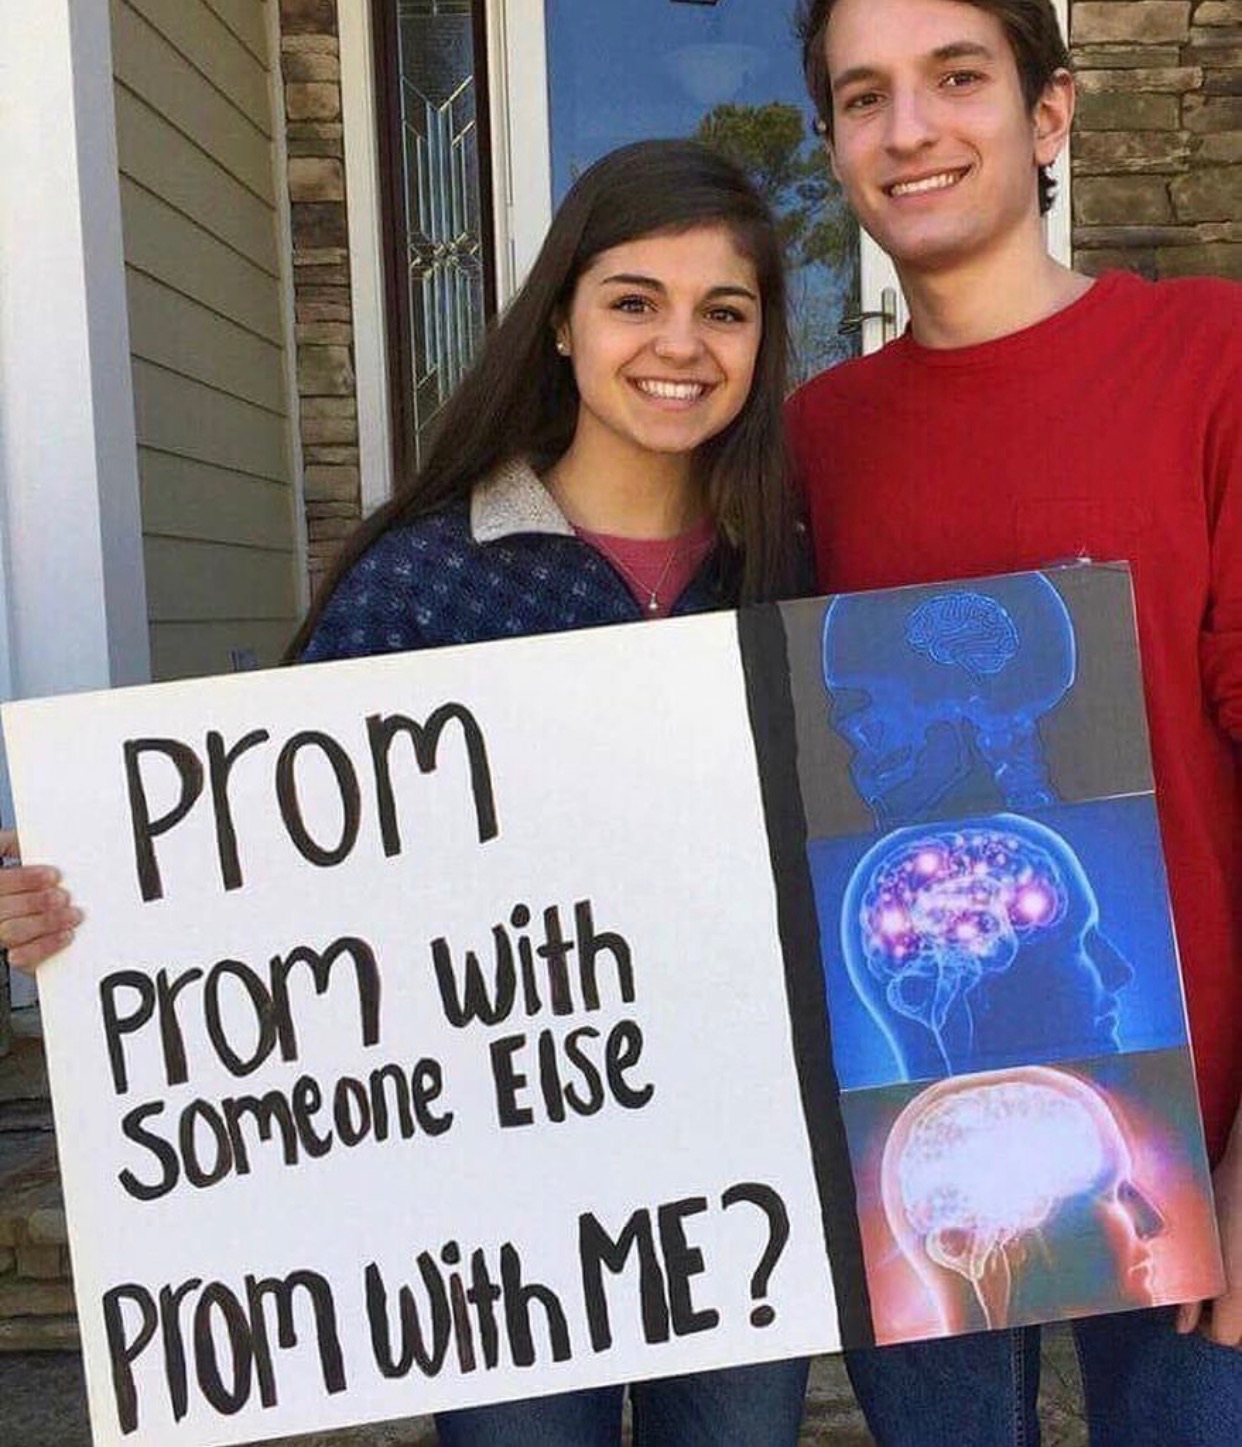 memes - meme prom proposal - Prom prom with Someone else Prom With Me?